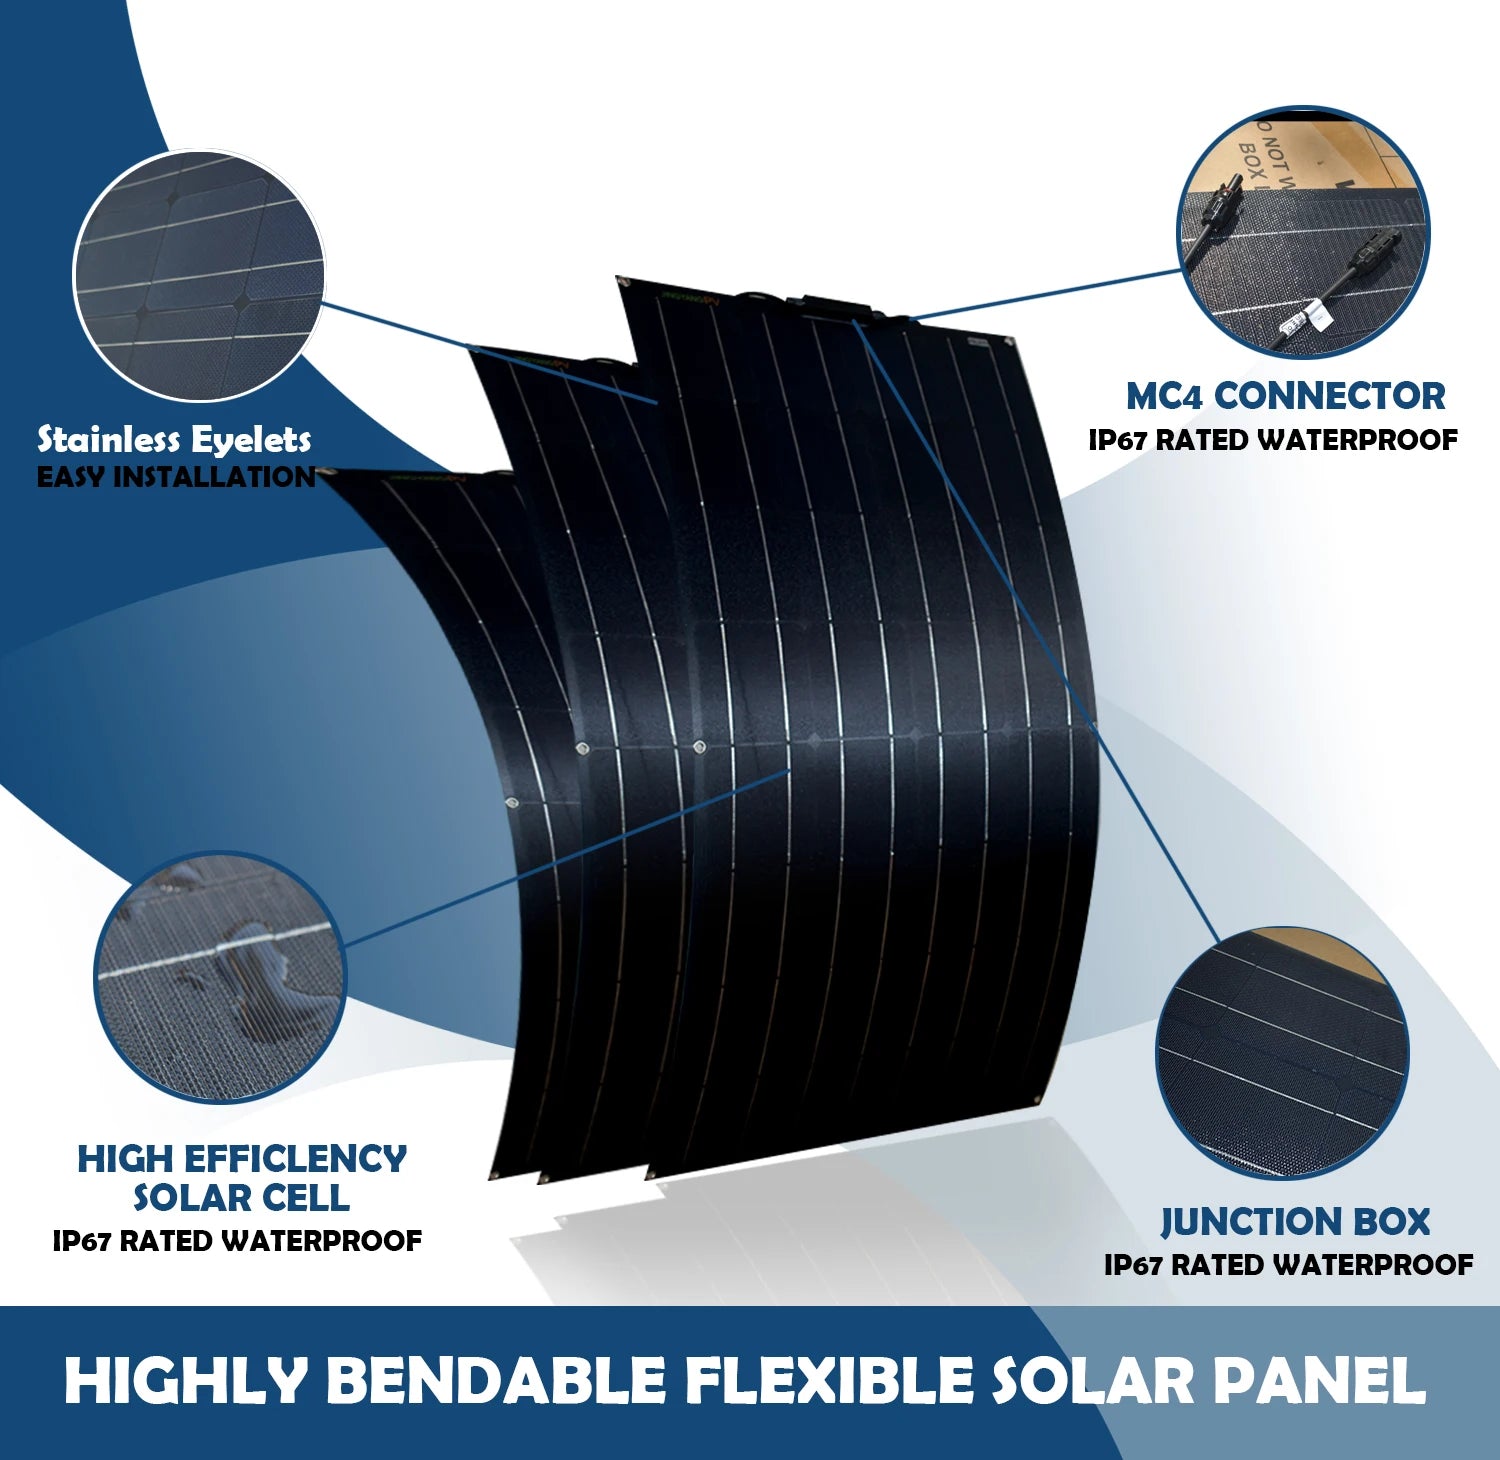 JINGYANG long lasting Semi Flexible solar panel, Waterproof solar panel with stainless eyelets and flexible design for easy installation.